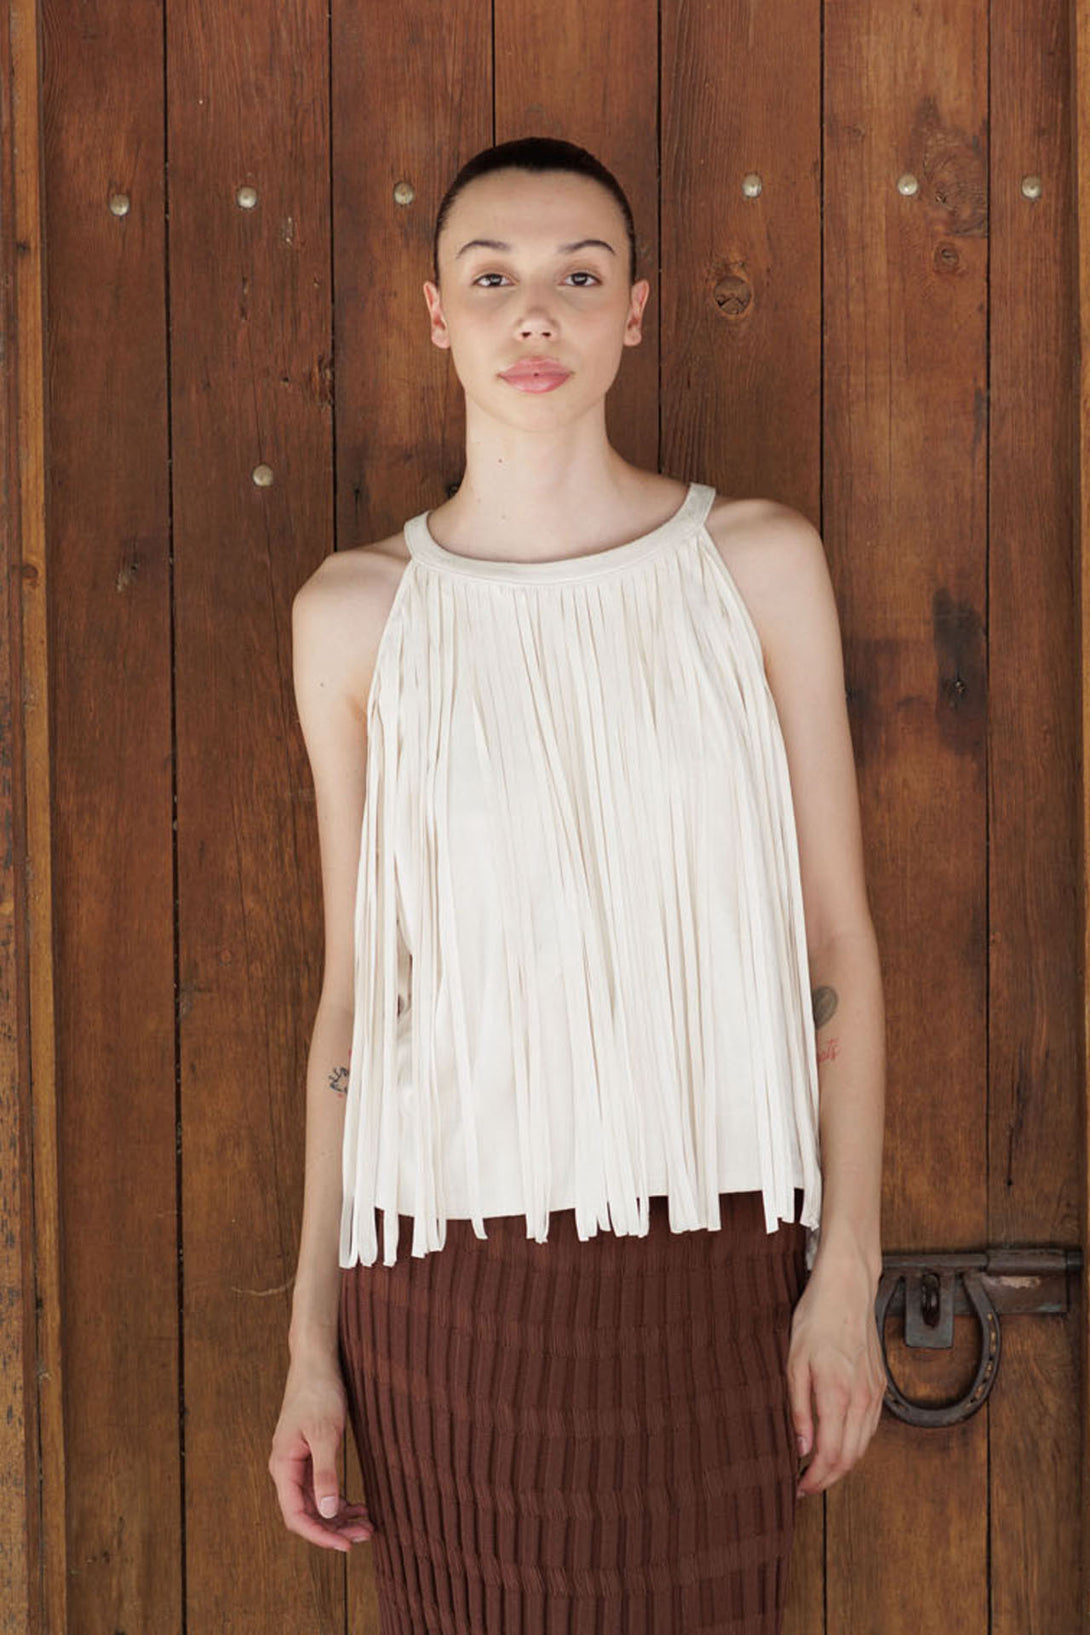 cowgirl shirt with fringe, ladies tops with fringes, white fringe top, HT 360 Collective,